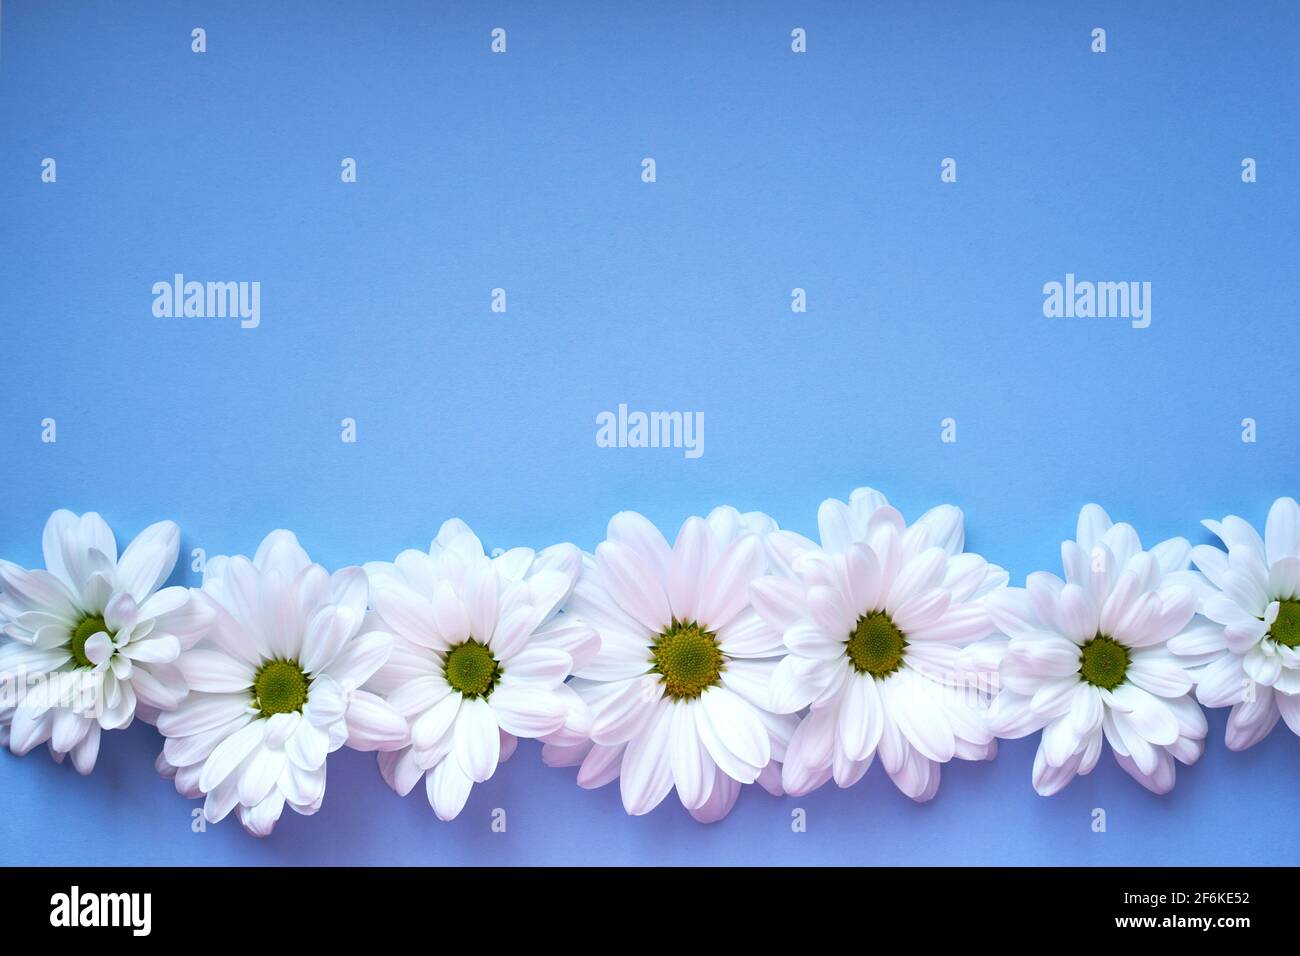 Light Blue Floral Background With White Gypsophila Flowers And Copy Space For Your Design Baby S Breath Flowers On Pastel Blue Desktop Flat Lay Spri Stock Photo Alamy